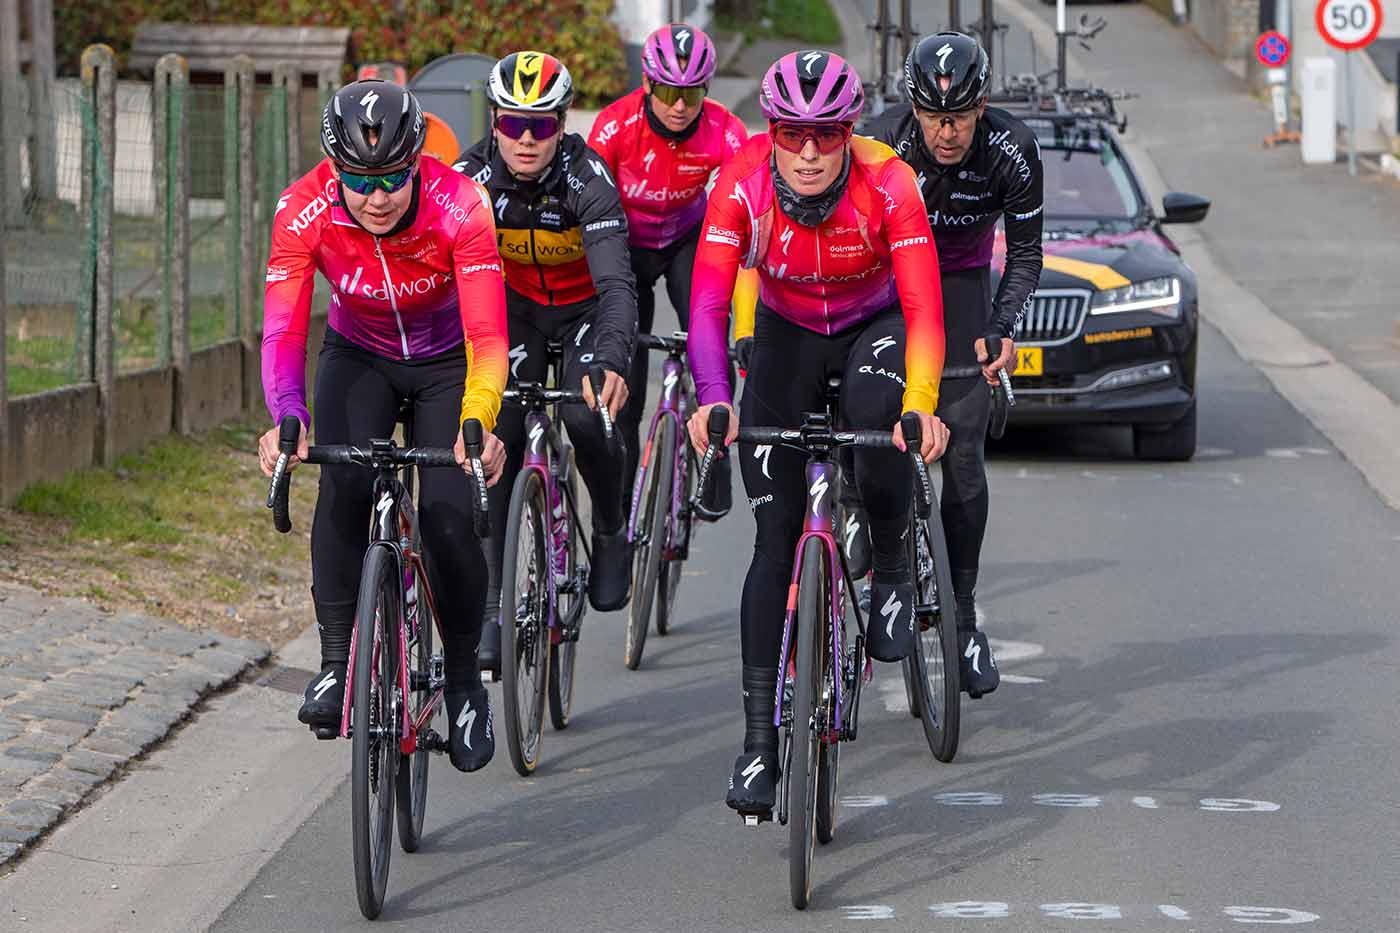 Women’s cycling is growing fast and new challenges are arising – Anna van der Breggen, interview part 2 - Johan Cruyff Institute